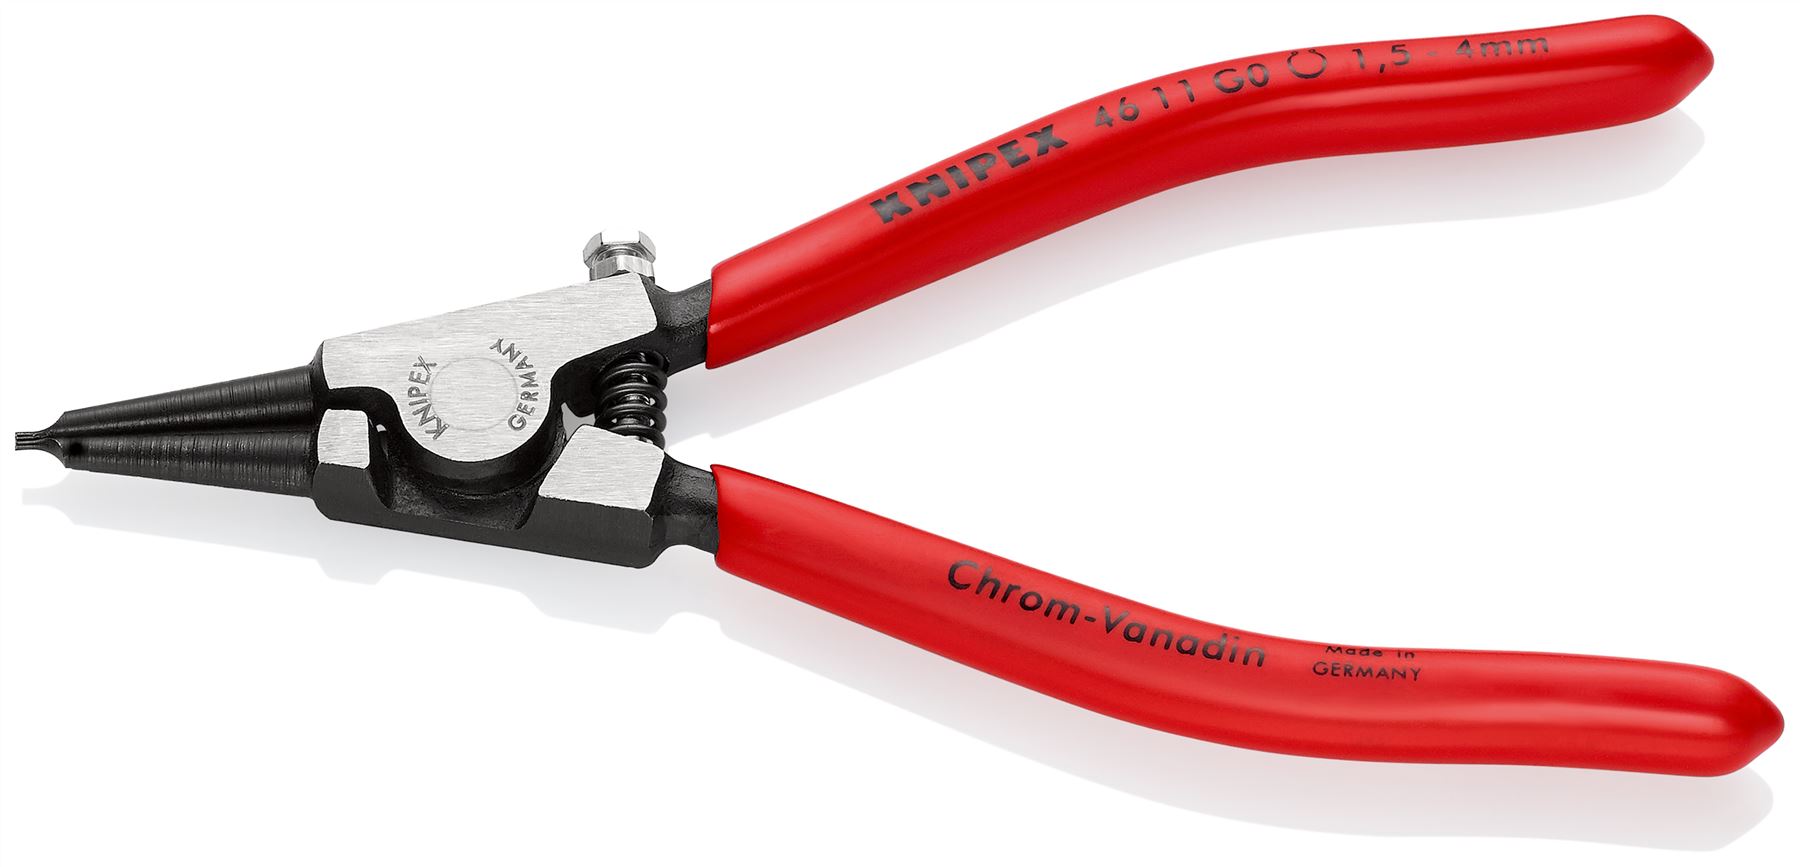 KNIPEX Circlip Pliers for Grip Rings on Shafts 140mm 0.9mm Diameter Tips 46 11 G0